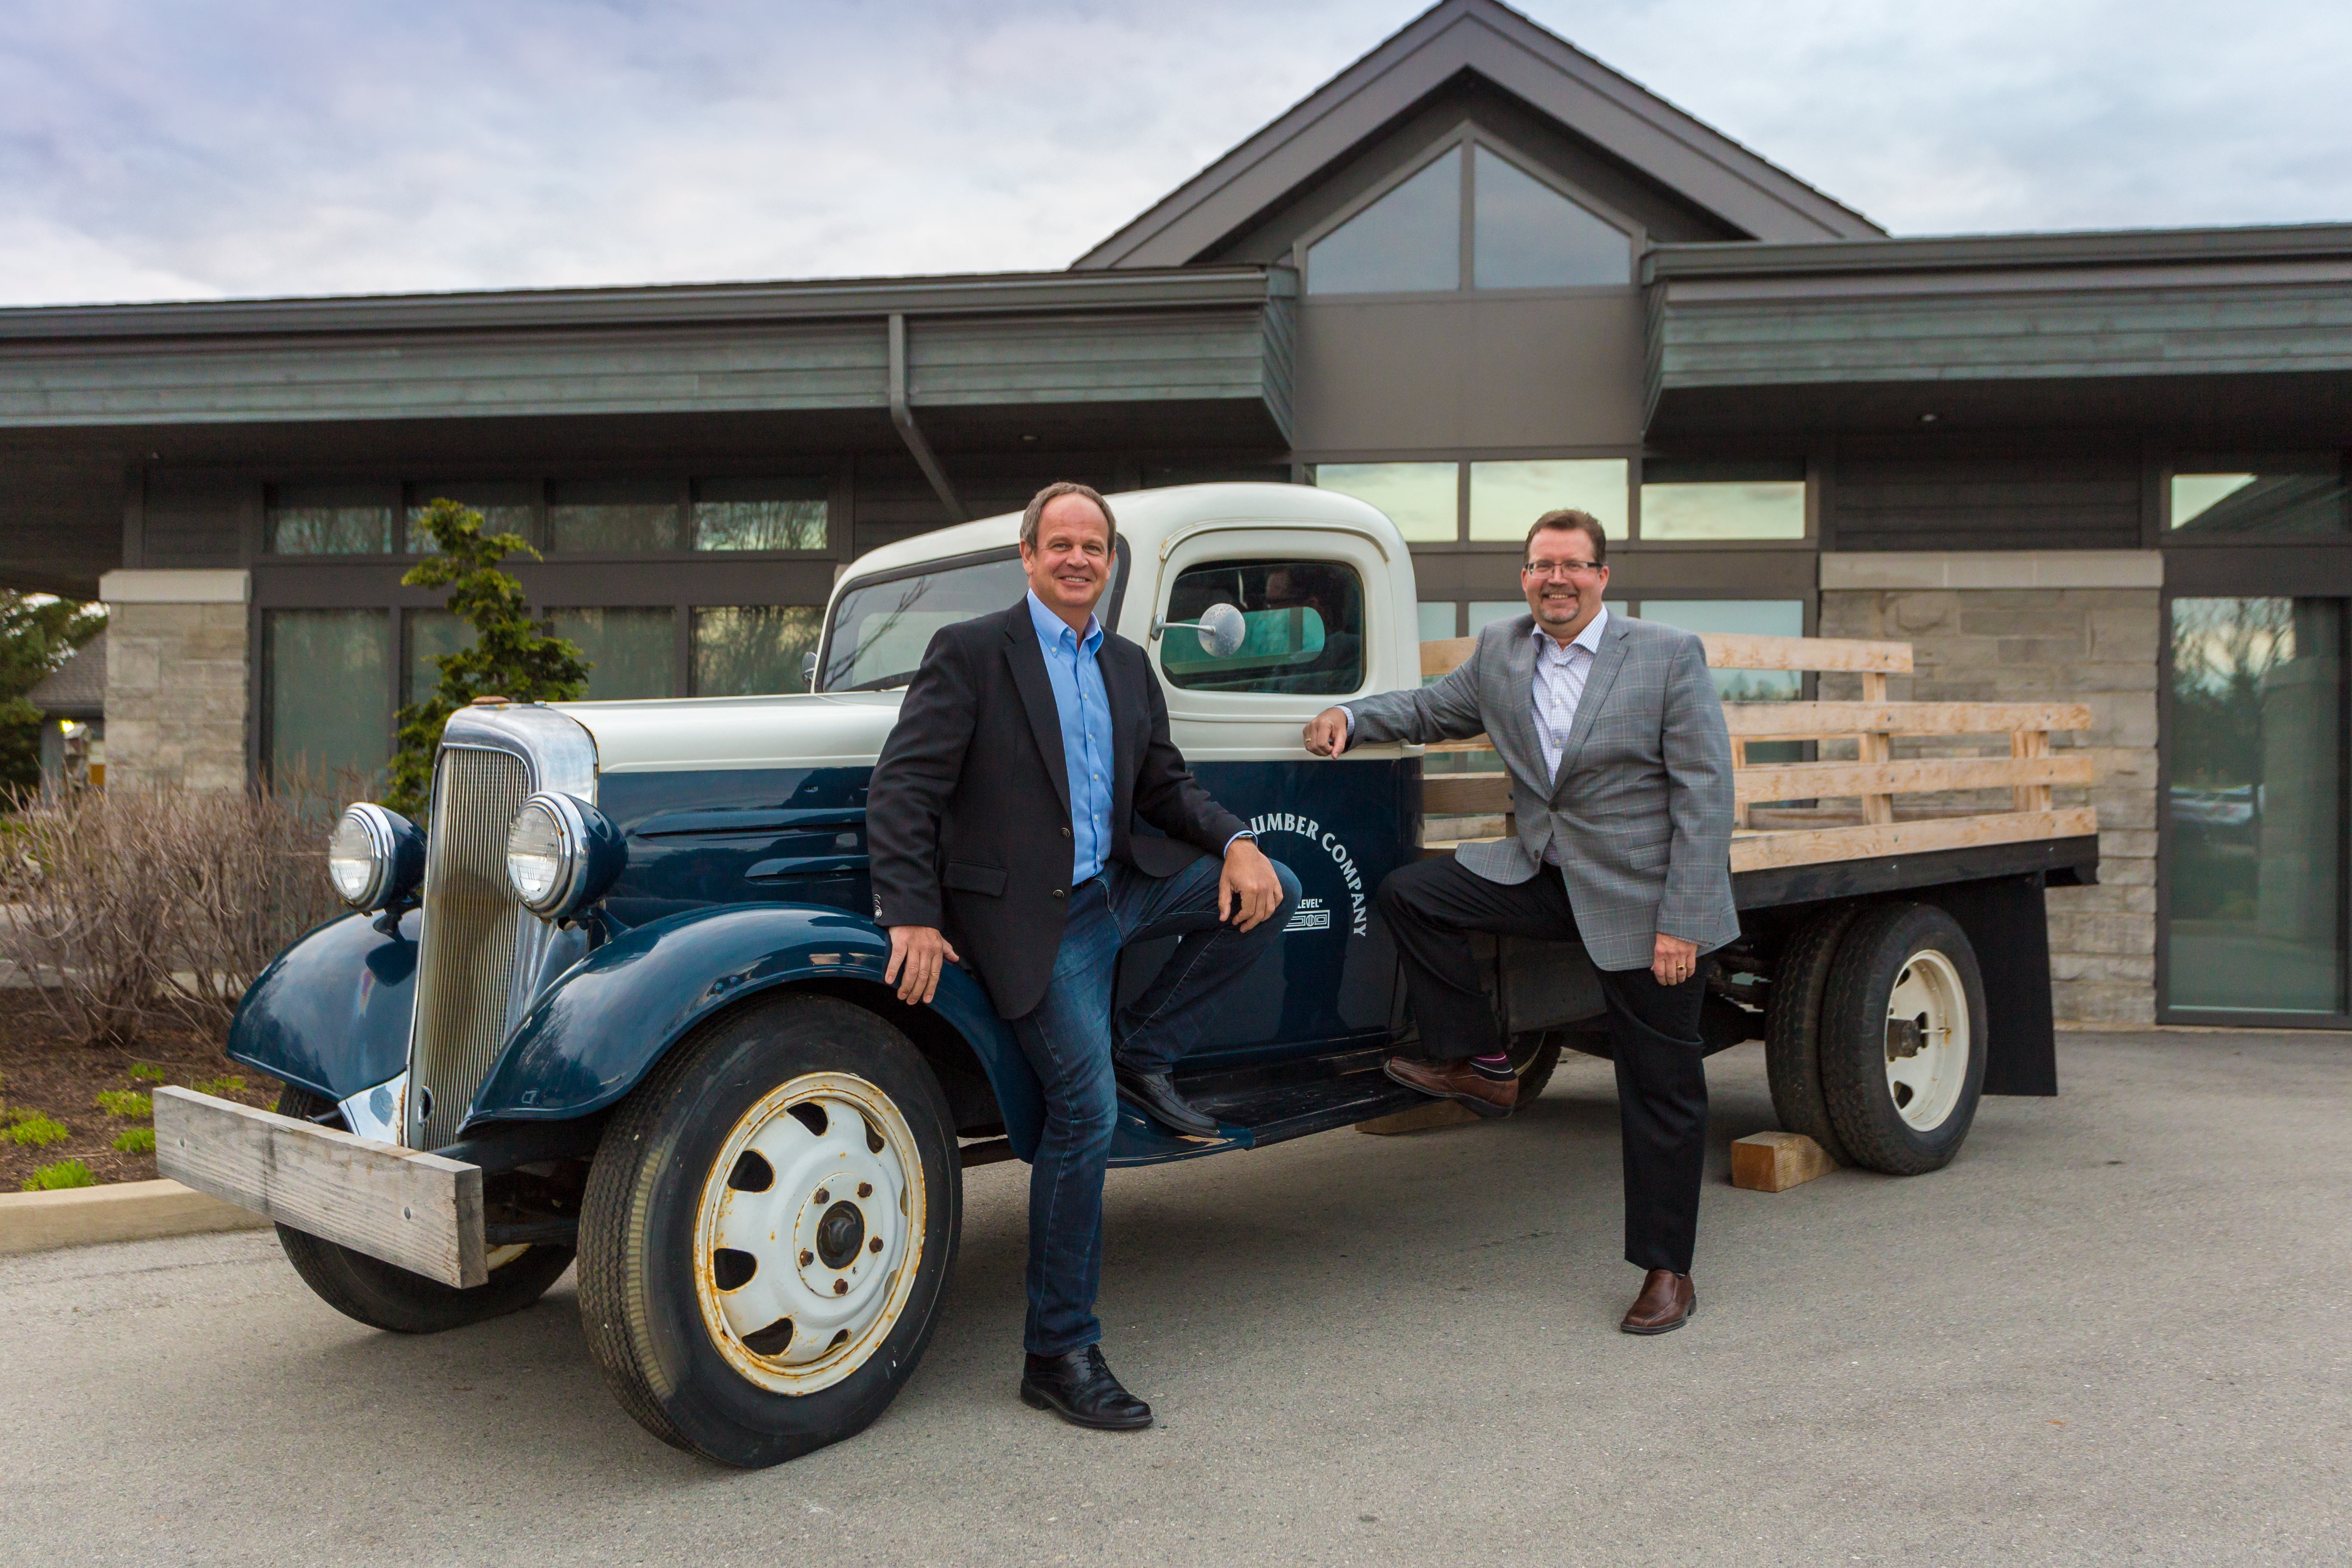 Our owner, Peter Turkstra, and a Turkstra Lumber executive posing with our preserved retro delivery truck